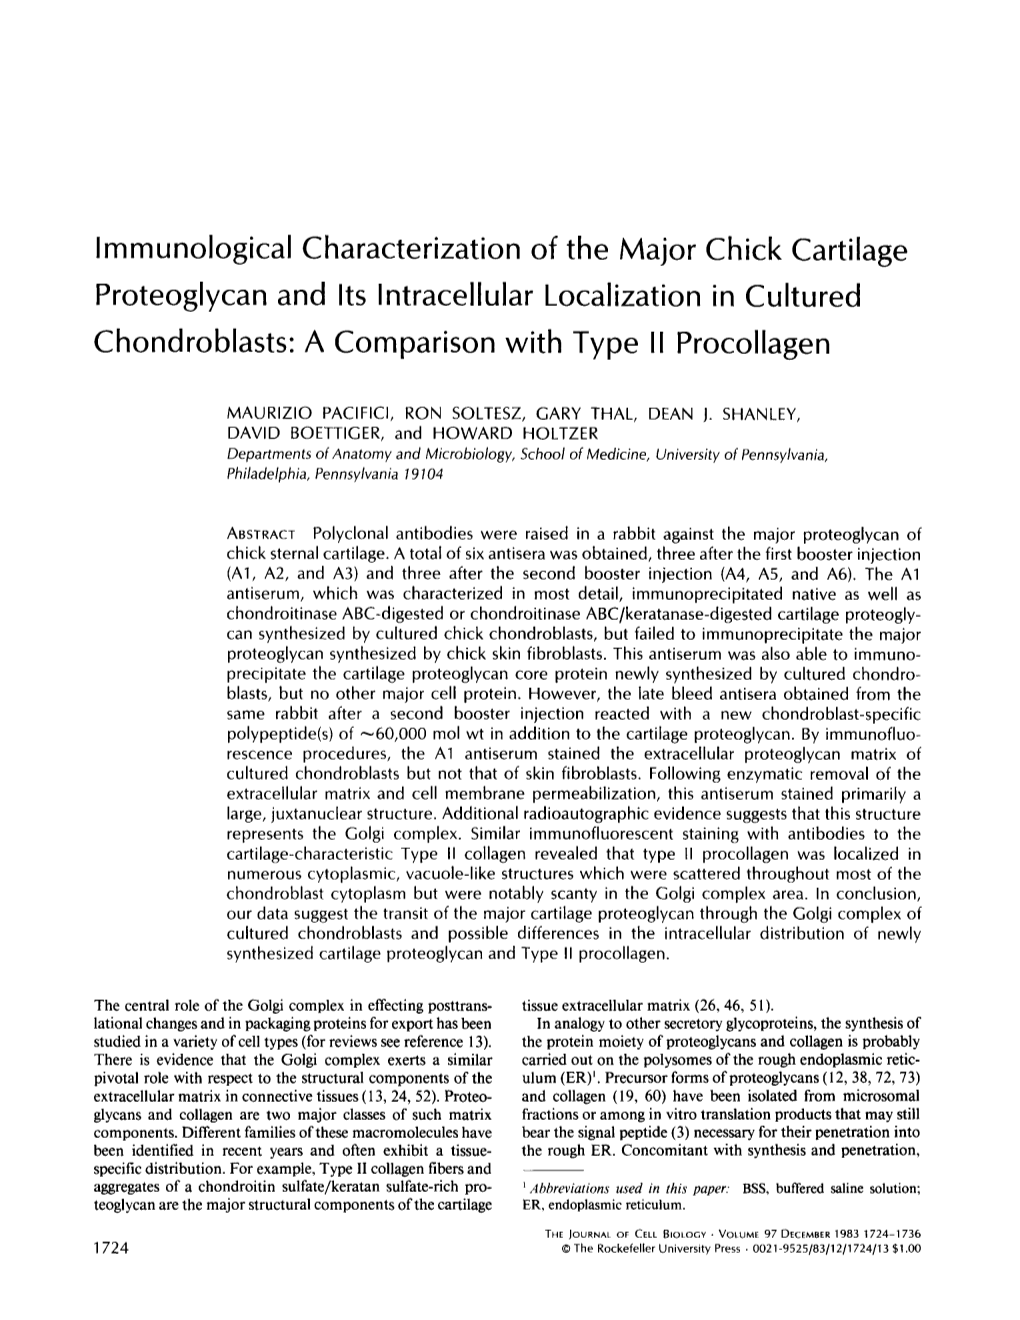 Immunological Characterization of the Major Chick Cartilage Proteoglycan